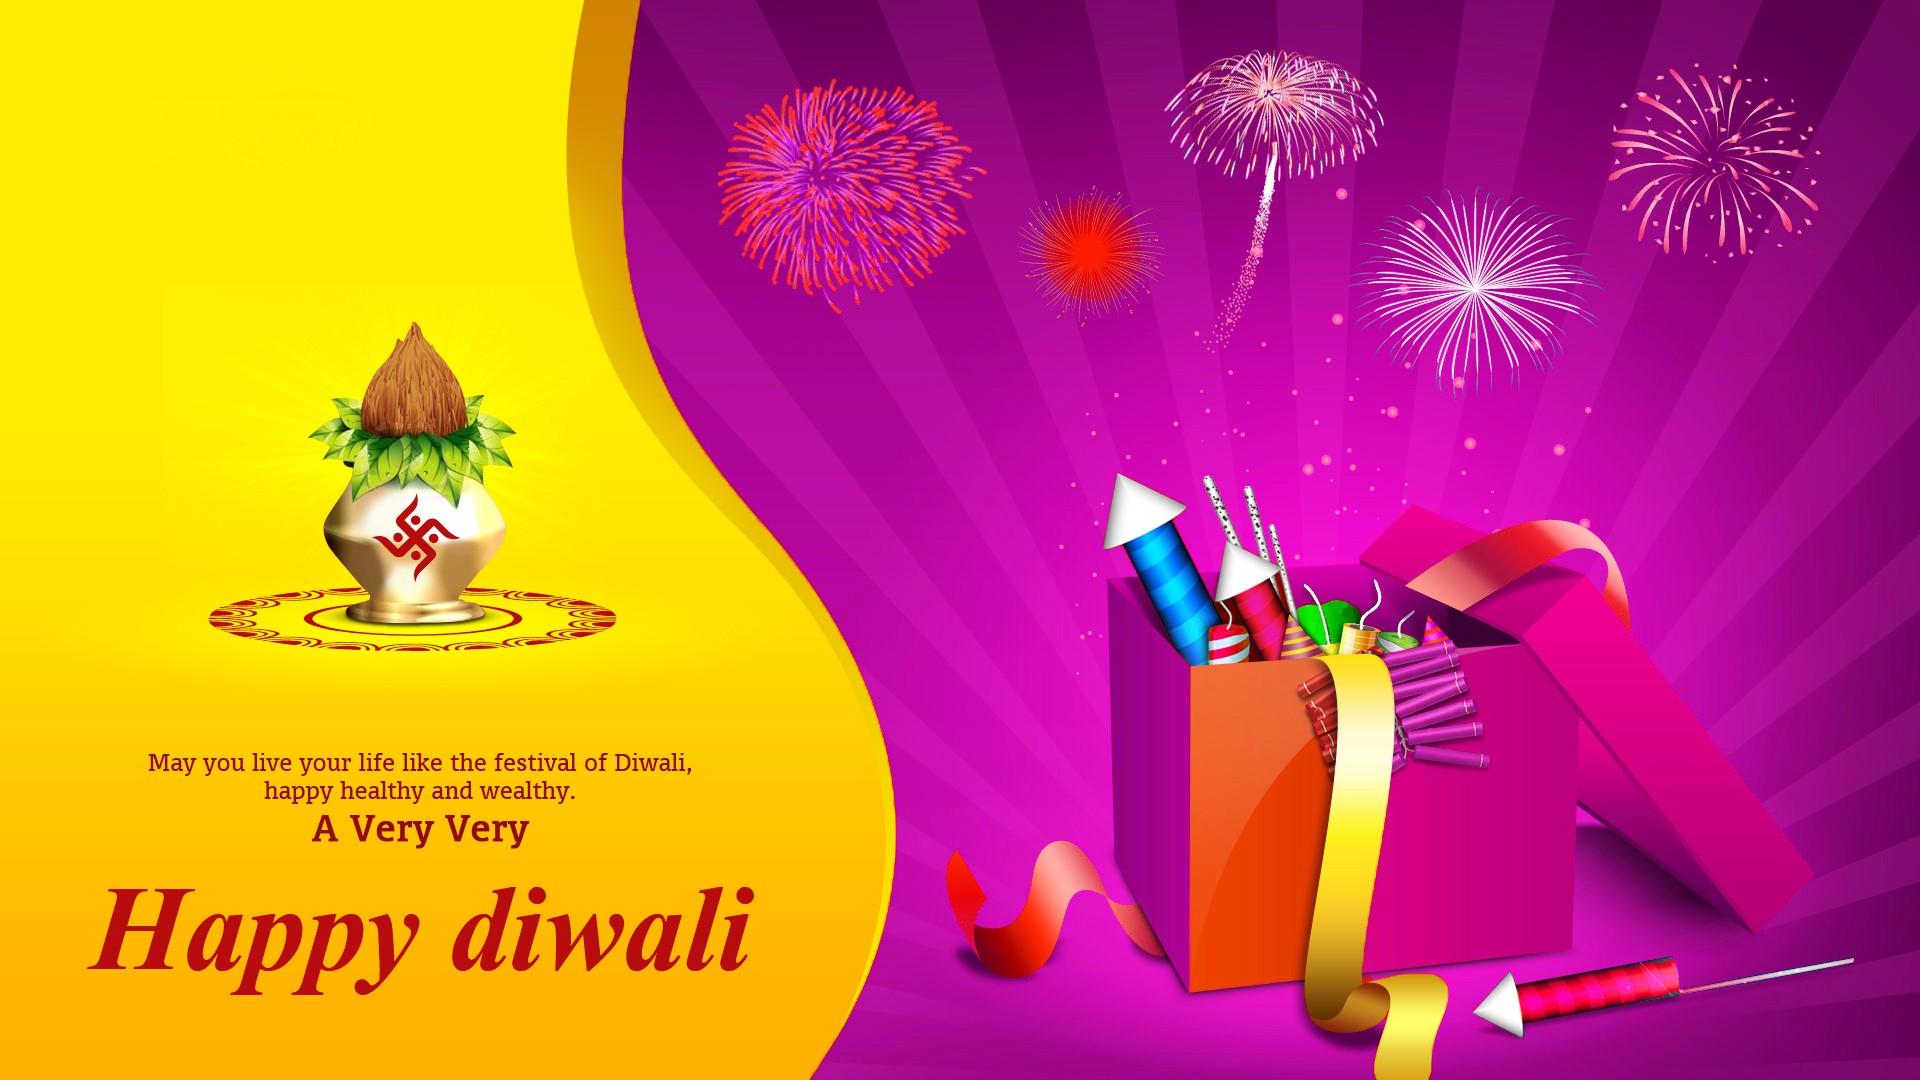 Diwali Quotes Images - Diwali Wishes Greeting Cards Download 